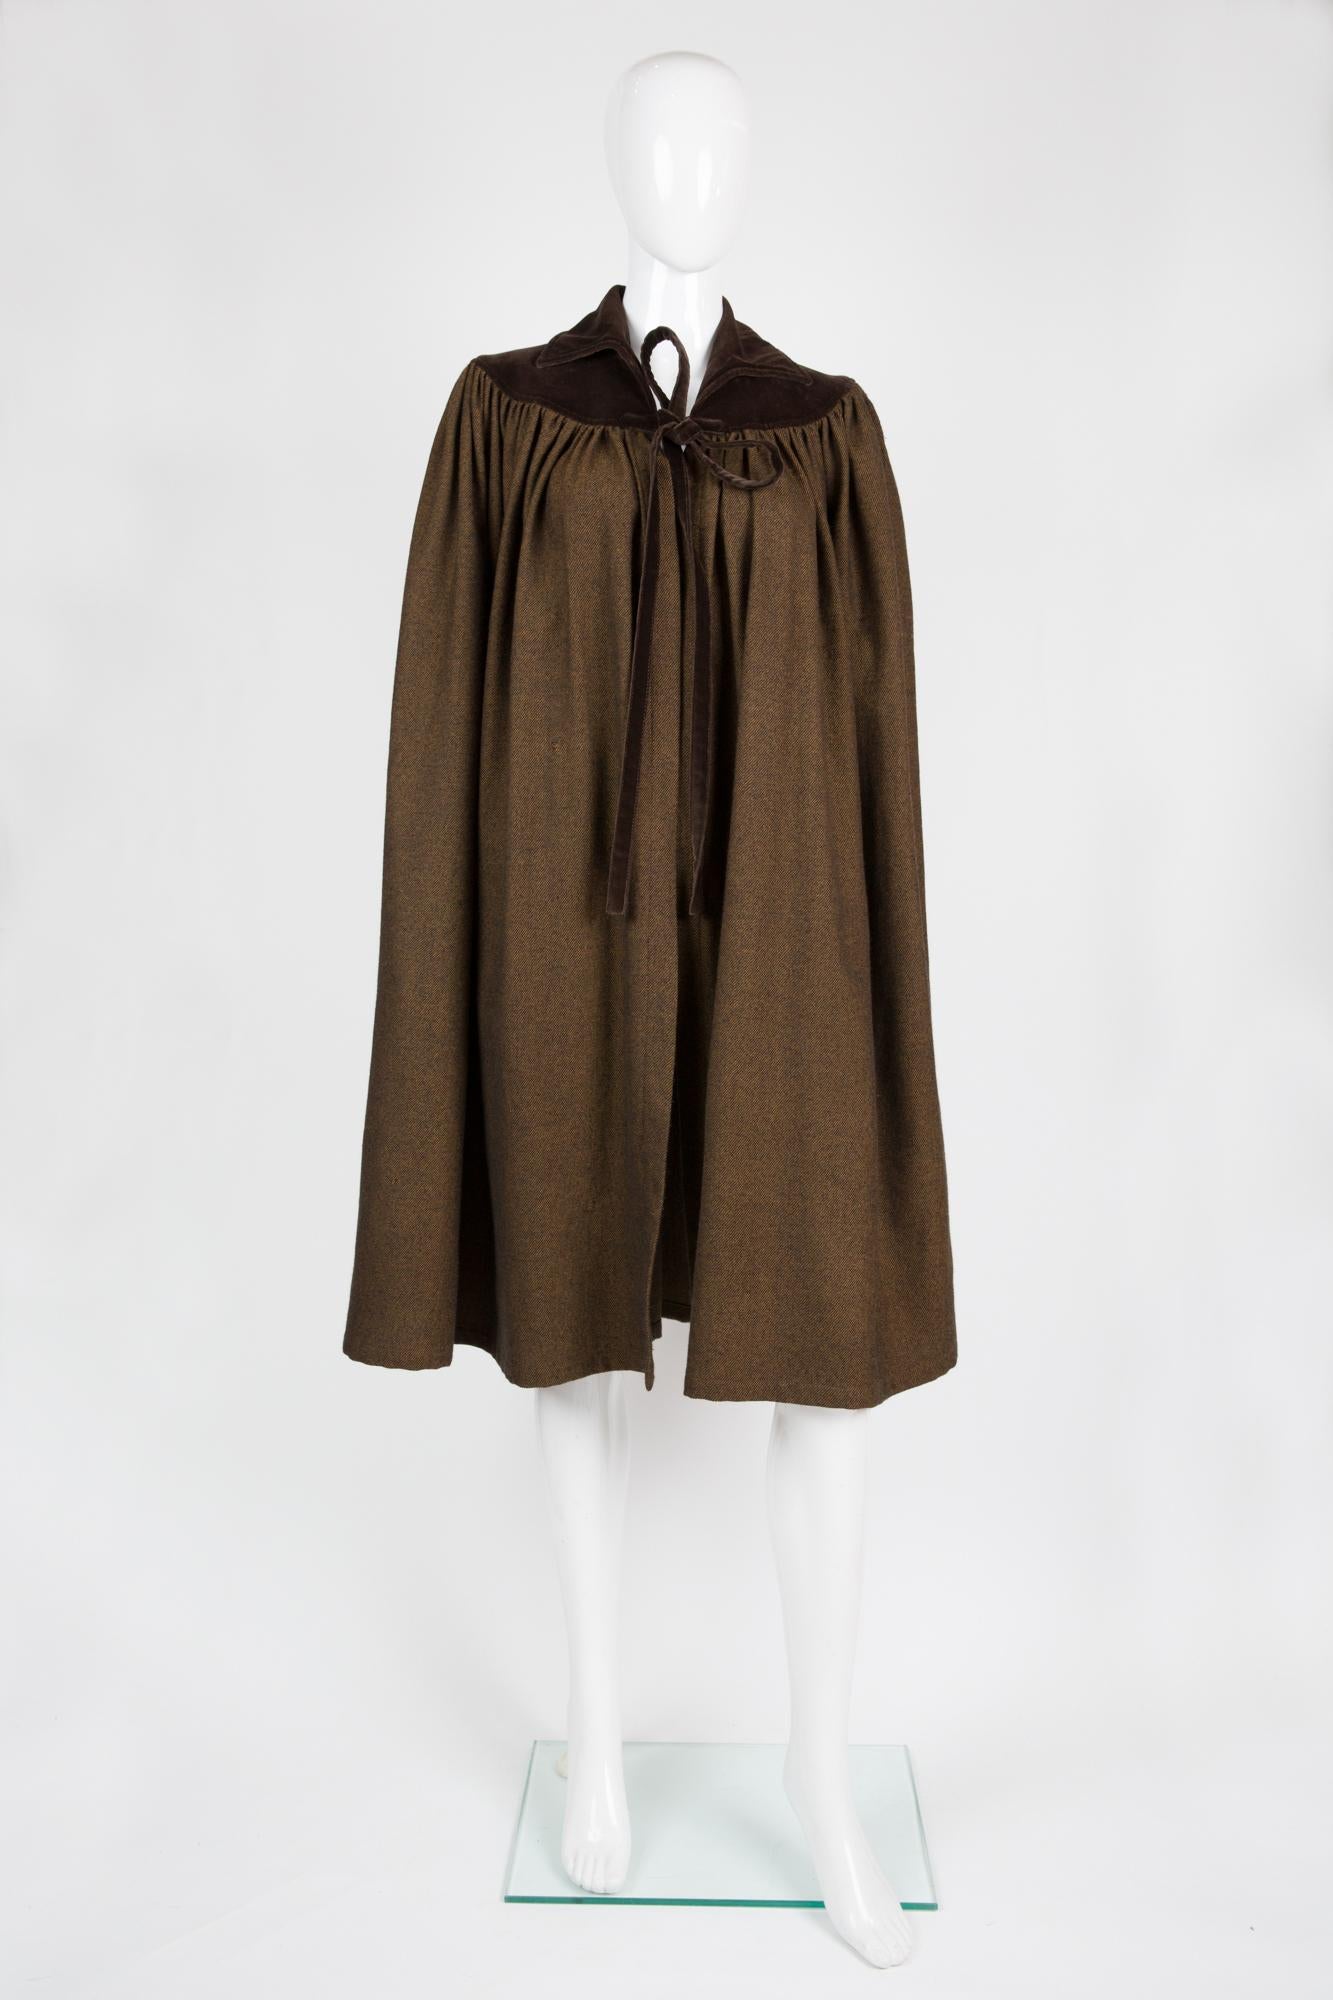 Iconic 1970 Yves Saint Laurent brown wool and velvet cape coat featuring a top shoulder brown velvet yoke, a front tie.
In good vintage condition. Made in France. (small restorations have been nicely done)
Estimated size 36fr/ US4/ UK8
Label size